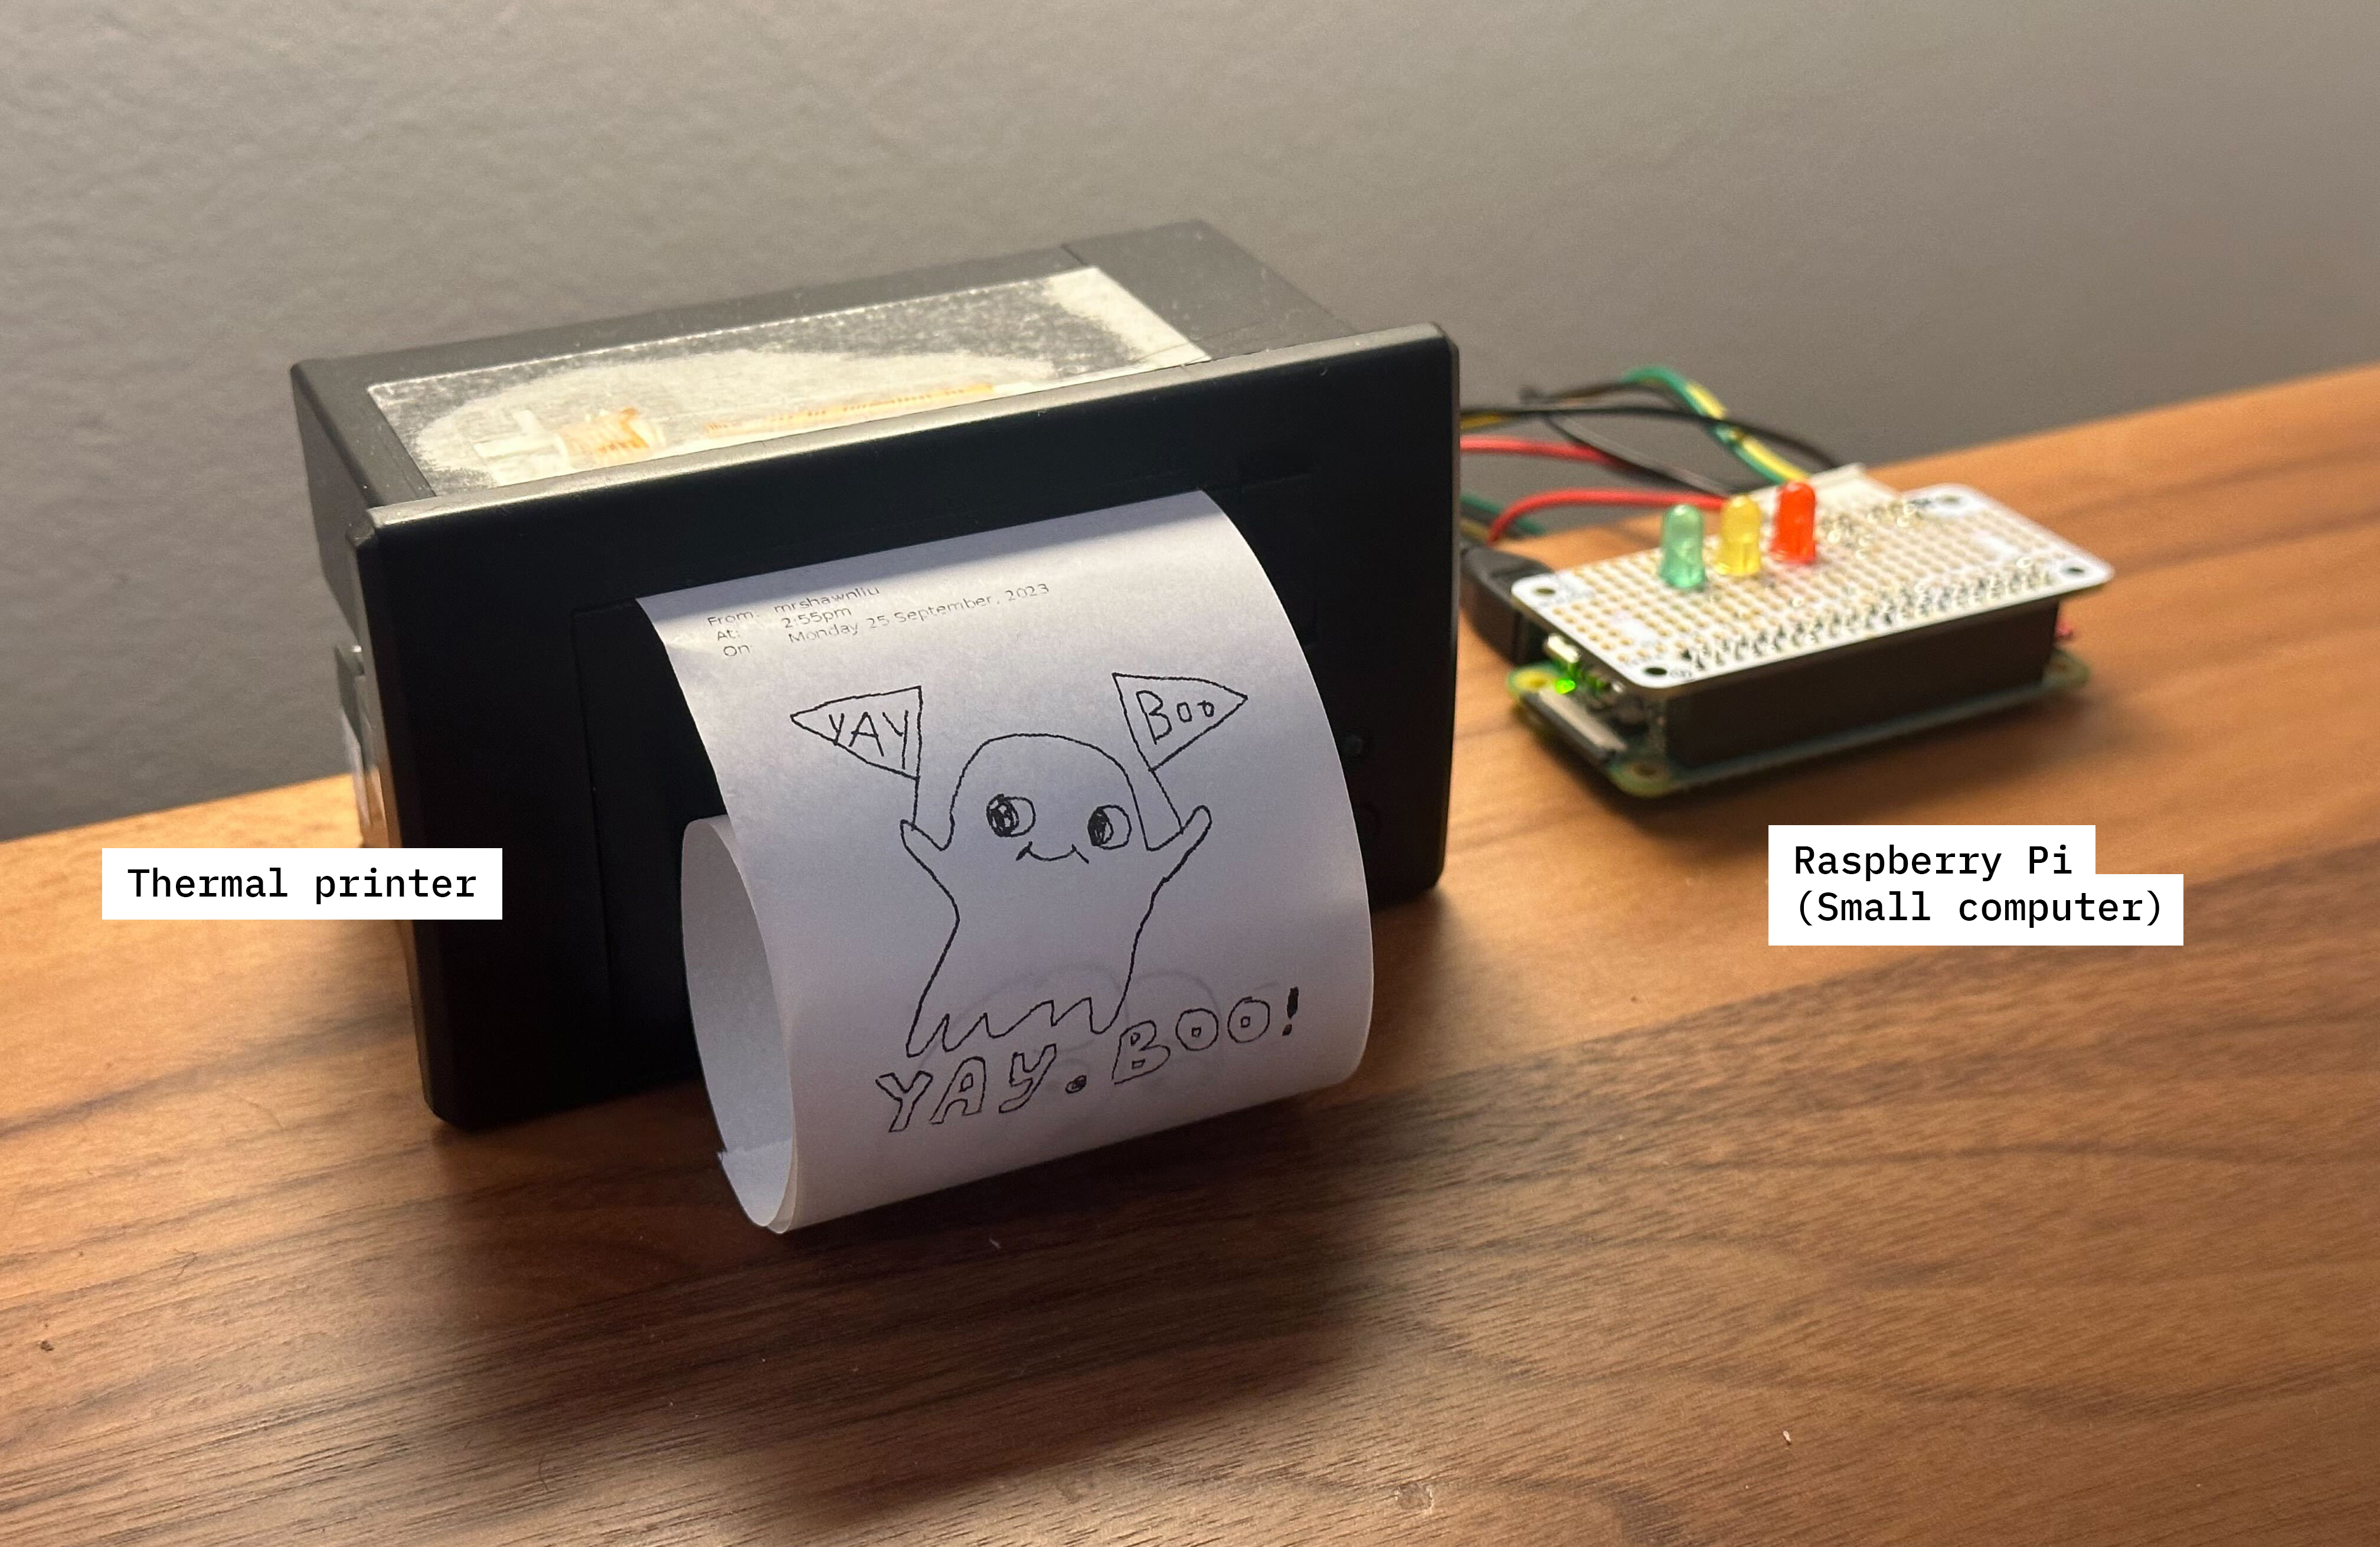 What the little printer looks like